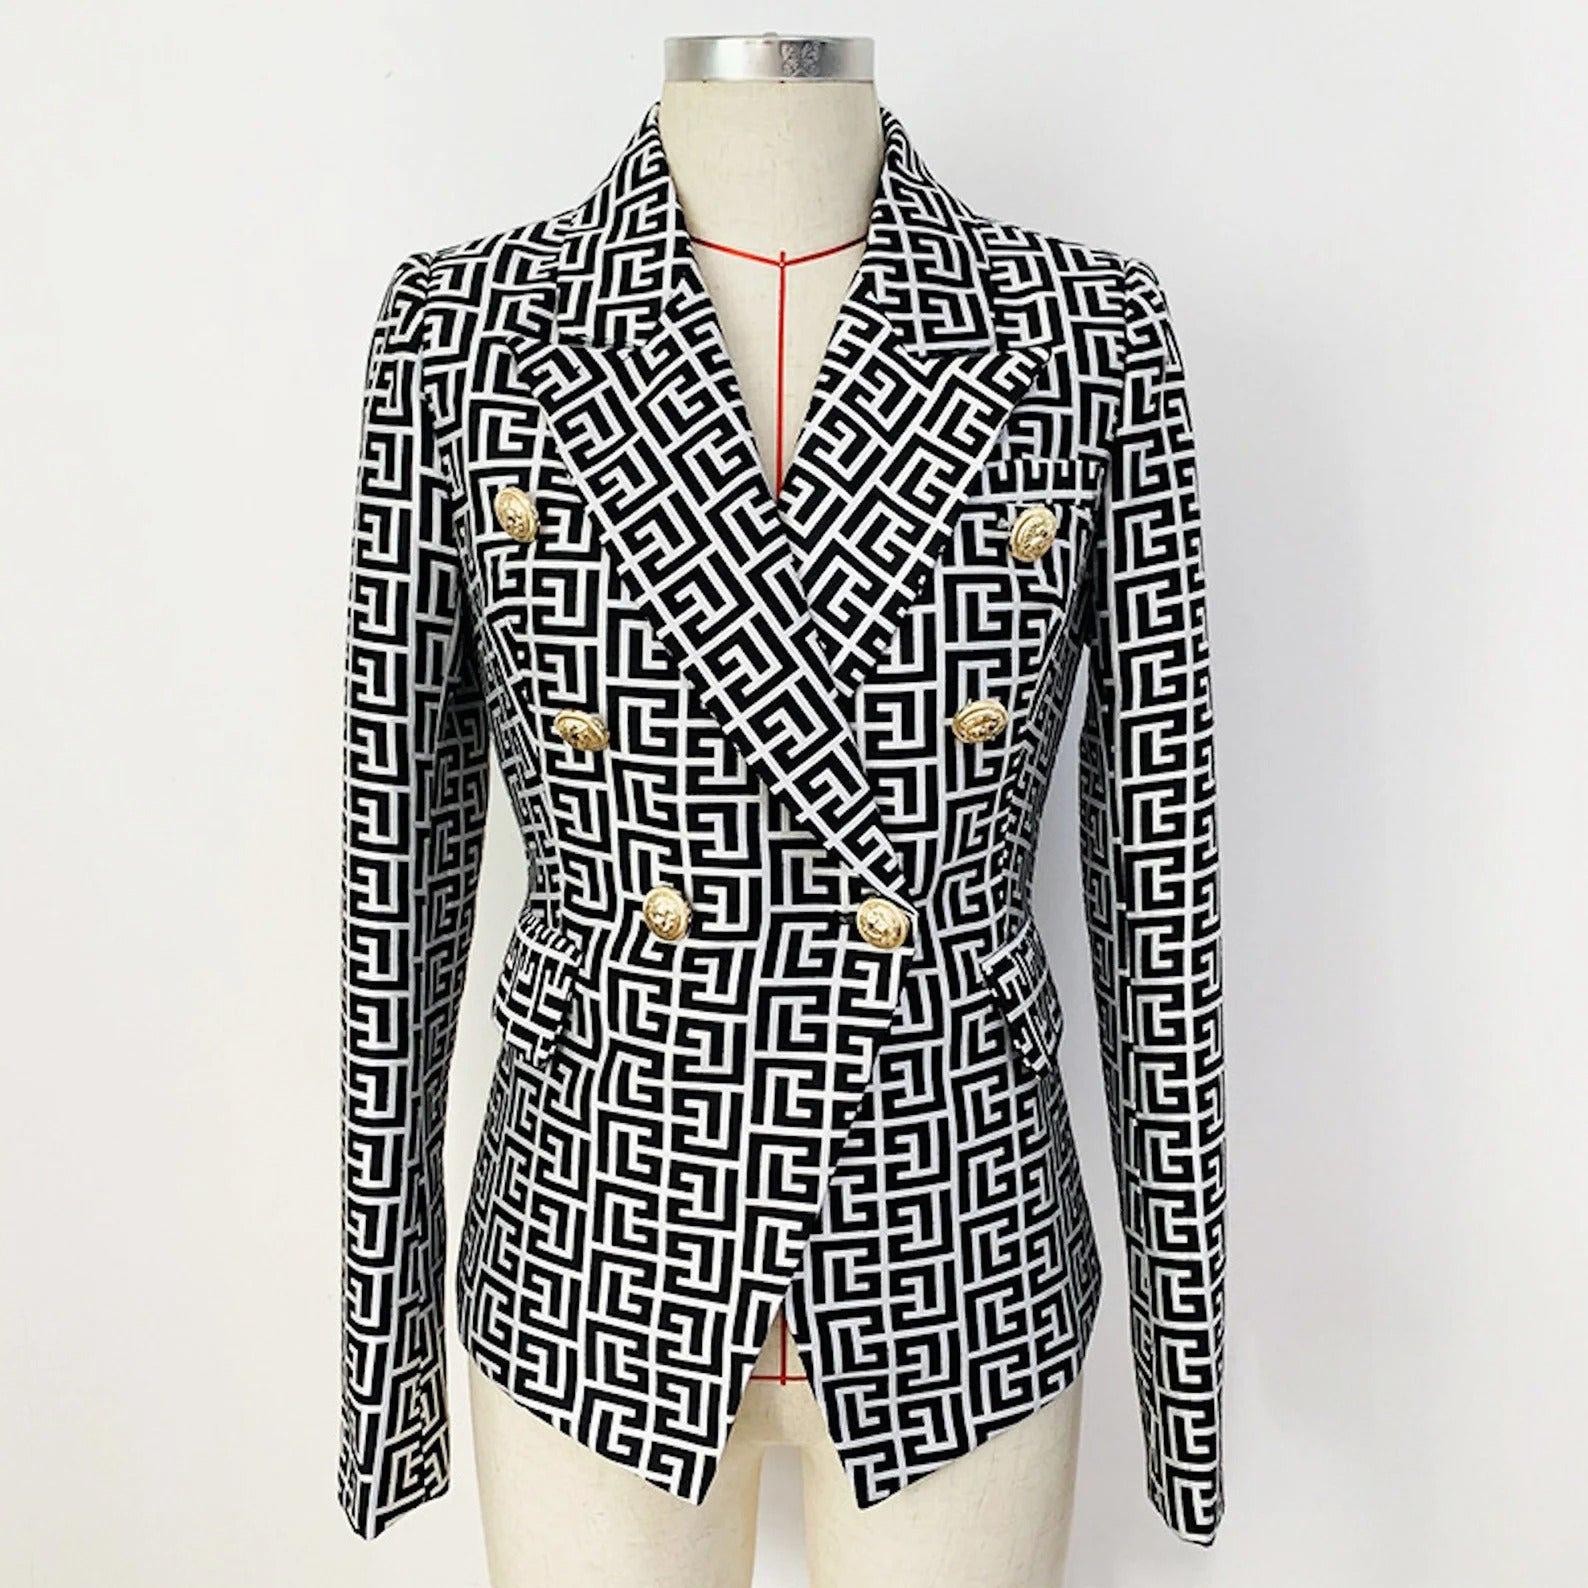 Women's Golden Lion Buttons Maze Pattern Fitted Blazer Jacket  UK CUSTOMER SERVICE! Fashion Pioneer - Women's Golden Lion Buttons Maze Pattern Fitted Blazer Jacket , Soft, light and stretchy. This jacket comes with a full lining, soft and comfortable to Wear. Material: Polyester ,Slim fit and long Sleeves with buttons and two pockets. Great for casual, formal, business wear and other special events.